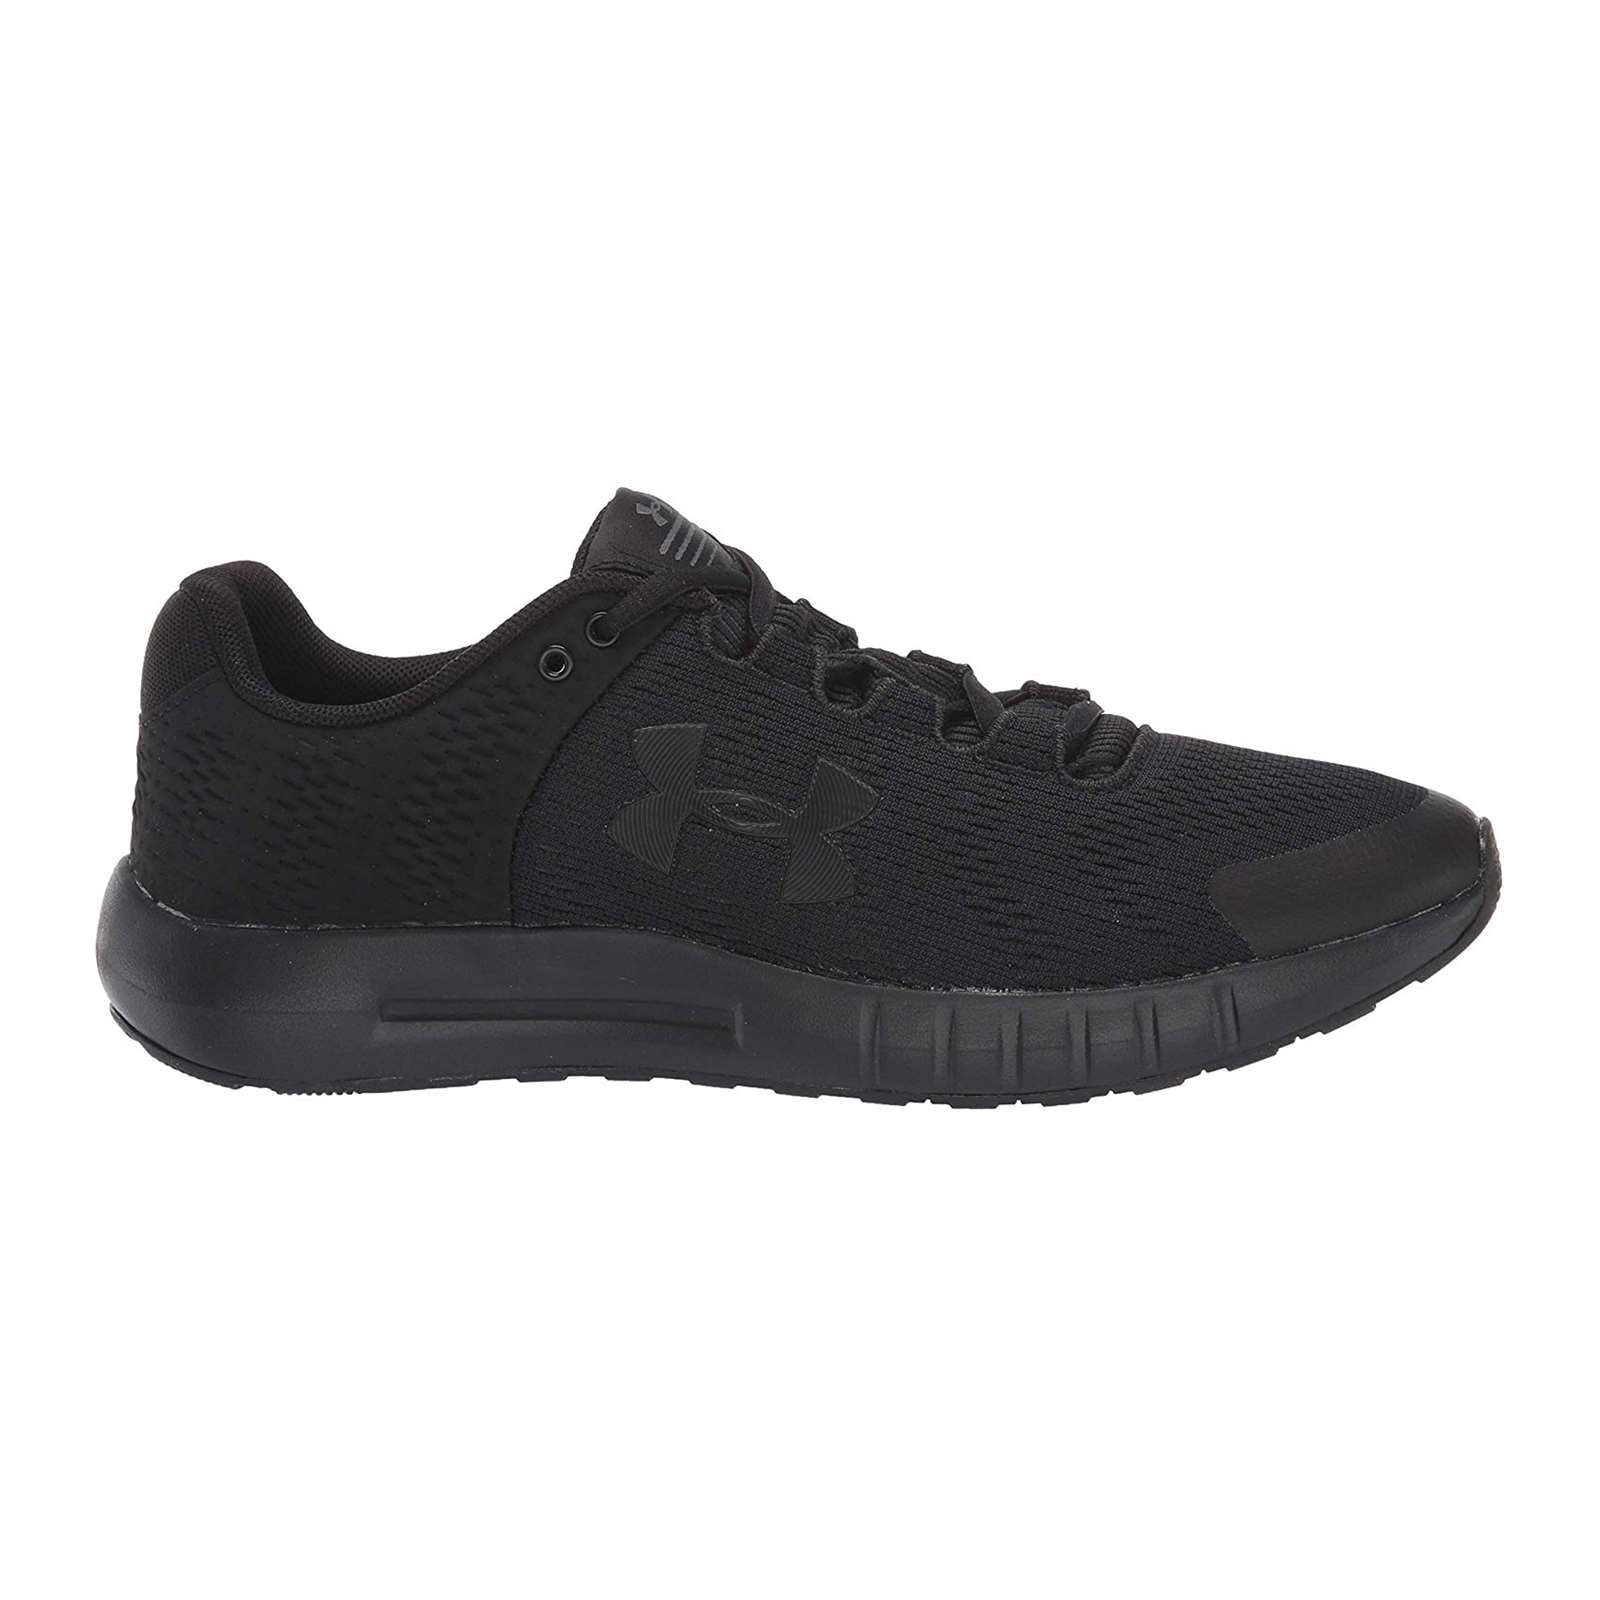 Buy > black under armour shoes women's > in stock